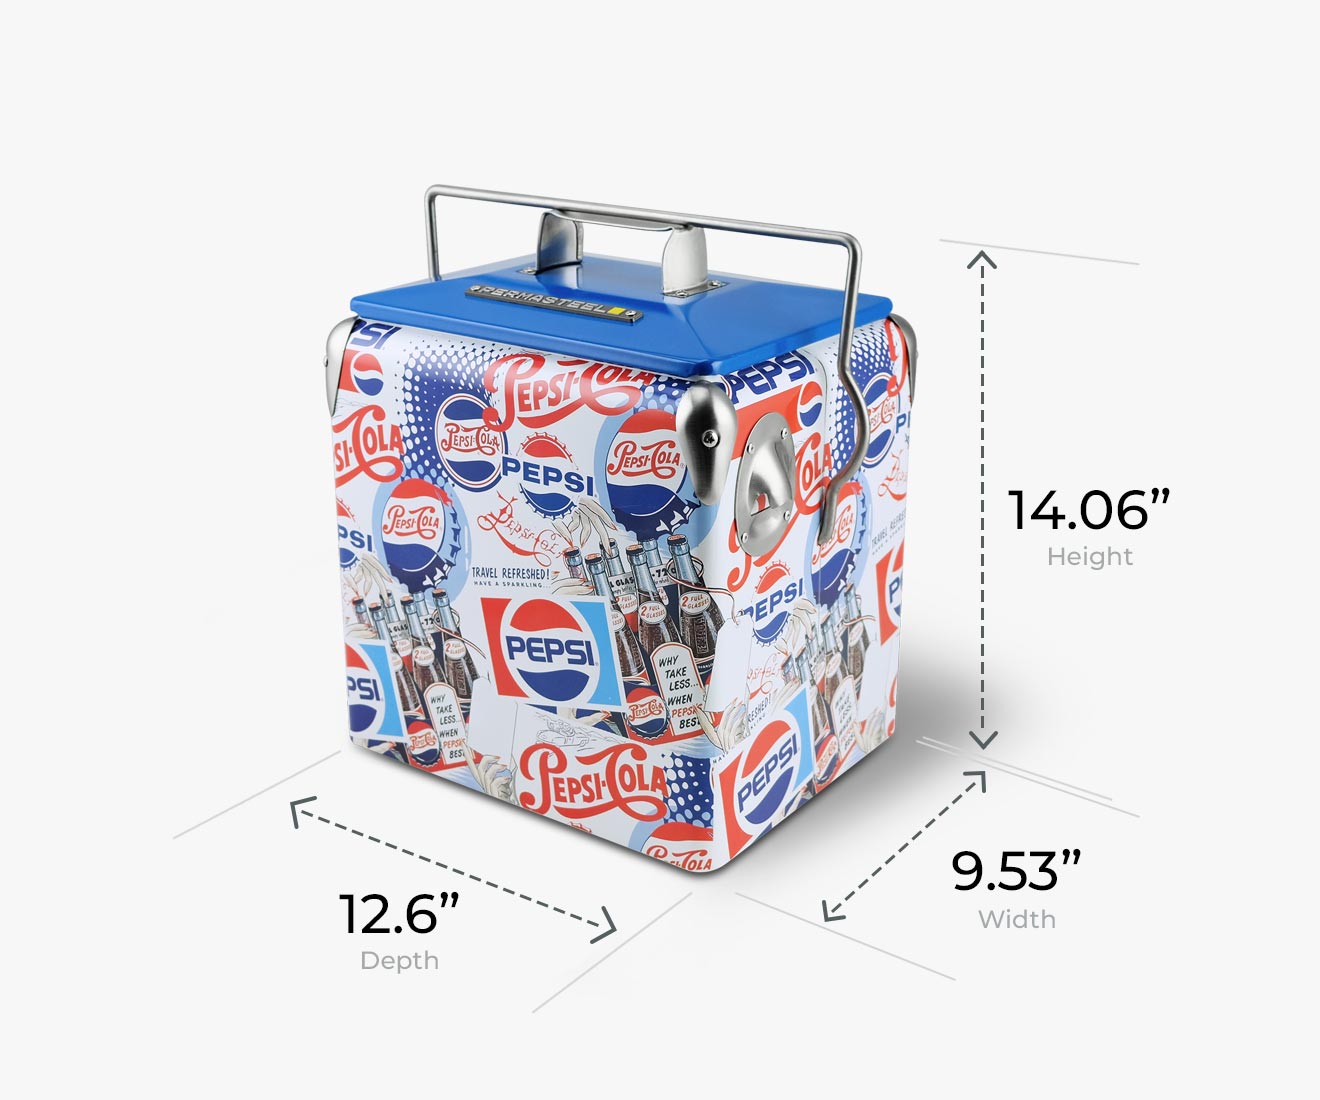 Pepsi 14-Quart Small Portable Picnic Cooler with Old Vintage Pepsi Logos Officially Licensed Cooler Personal Cooler Product Features Image 1